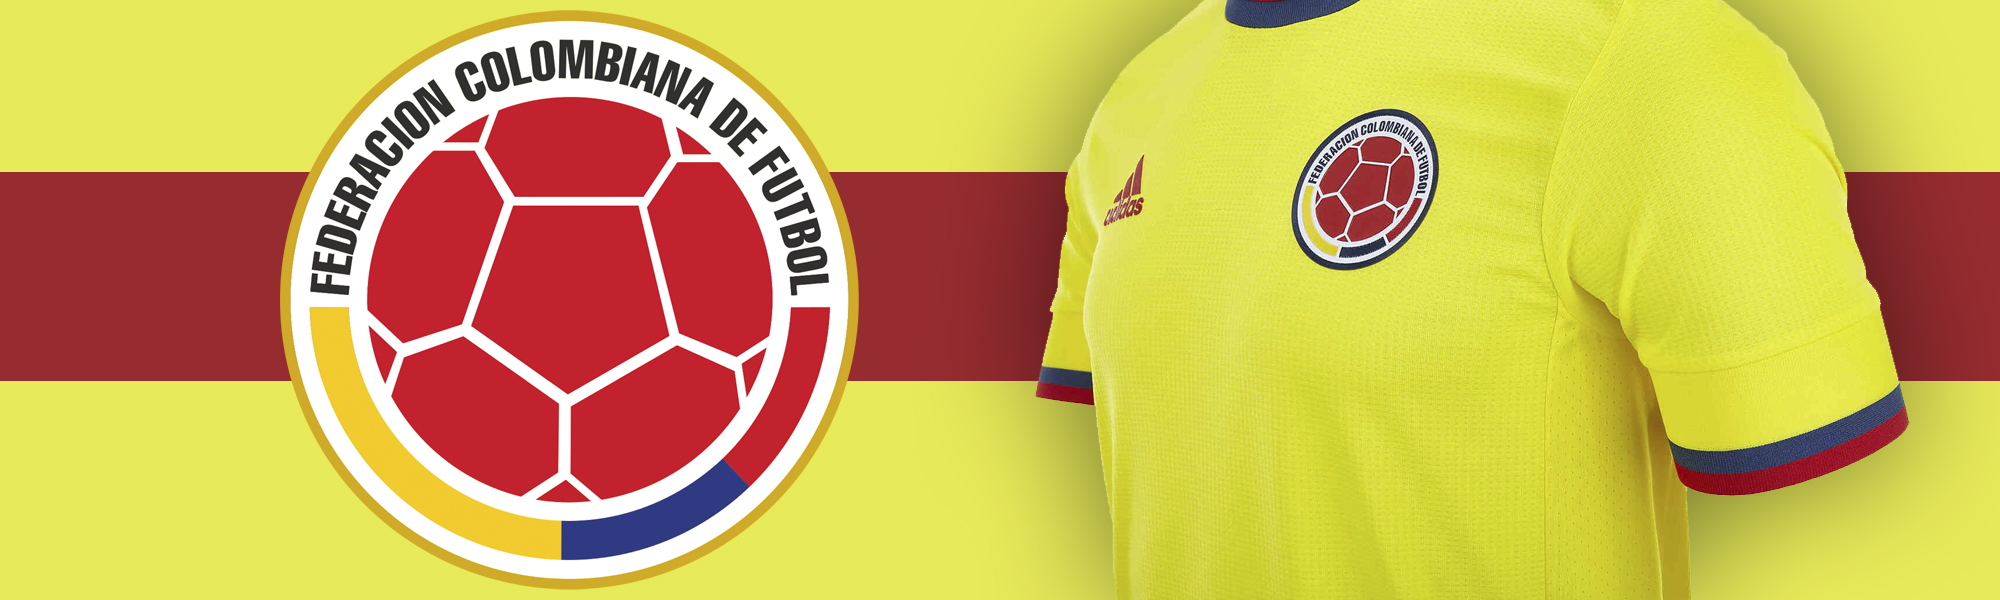 Colombia Soccer Jersey Men 2020 Sizes Available S XXL L XL M 